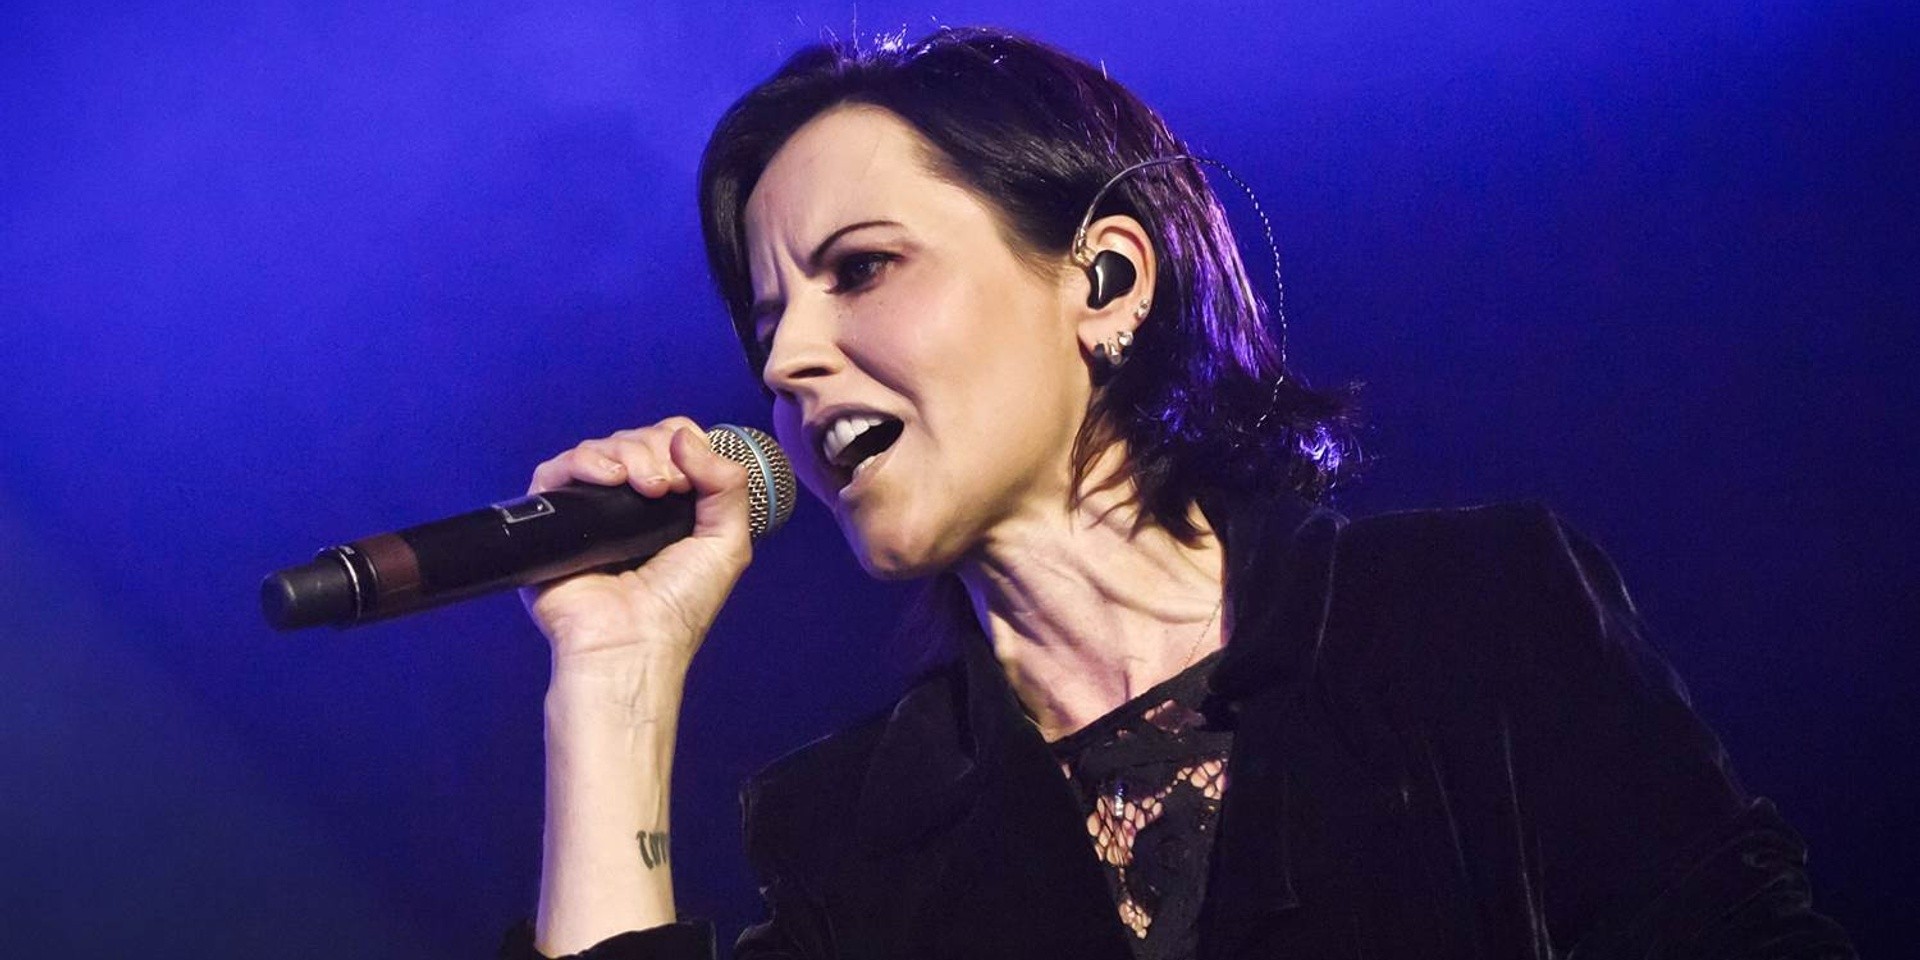 Dolores O'Riordan, frontwoman of The Cranberries, has passed away